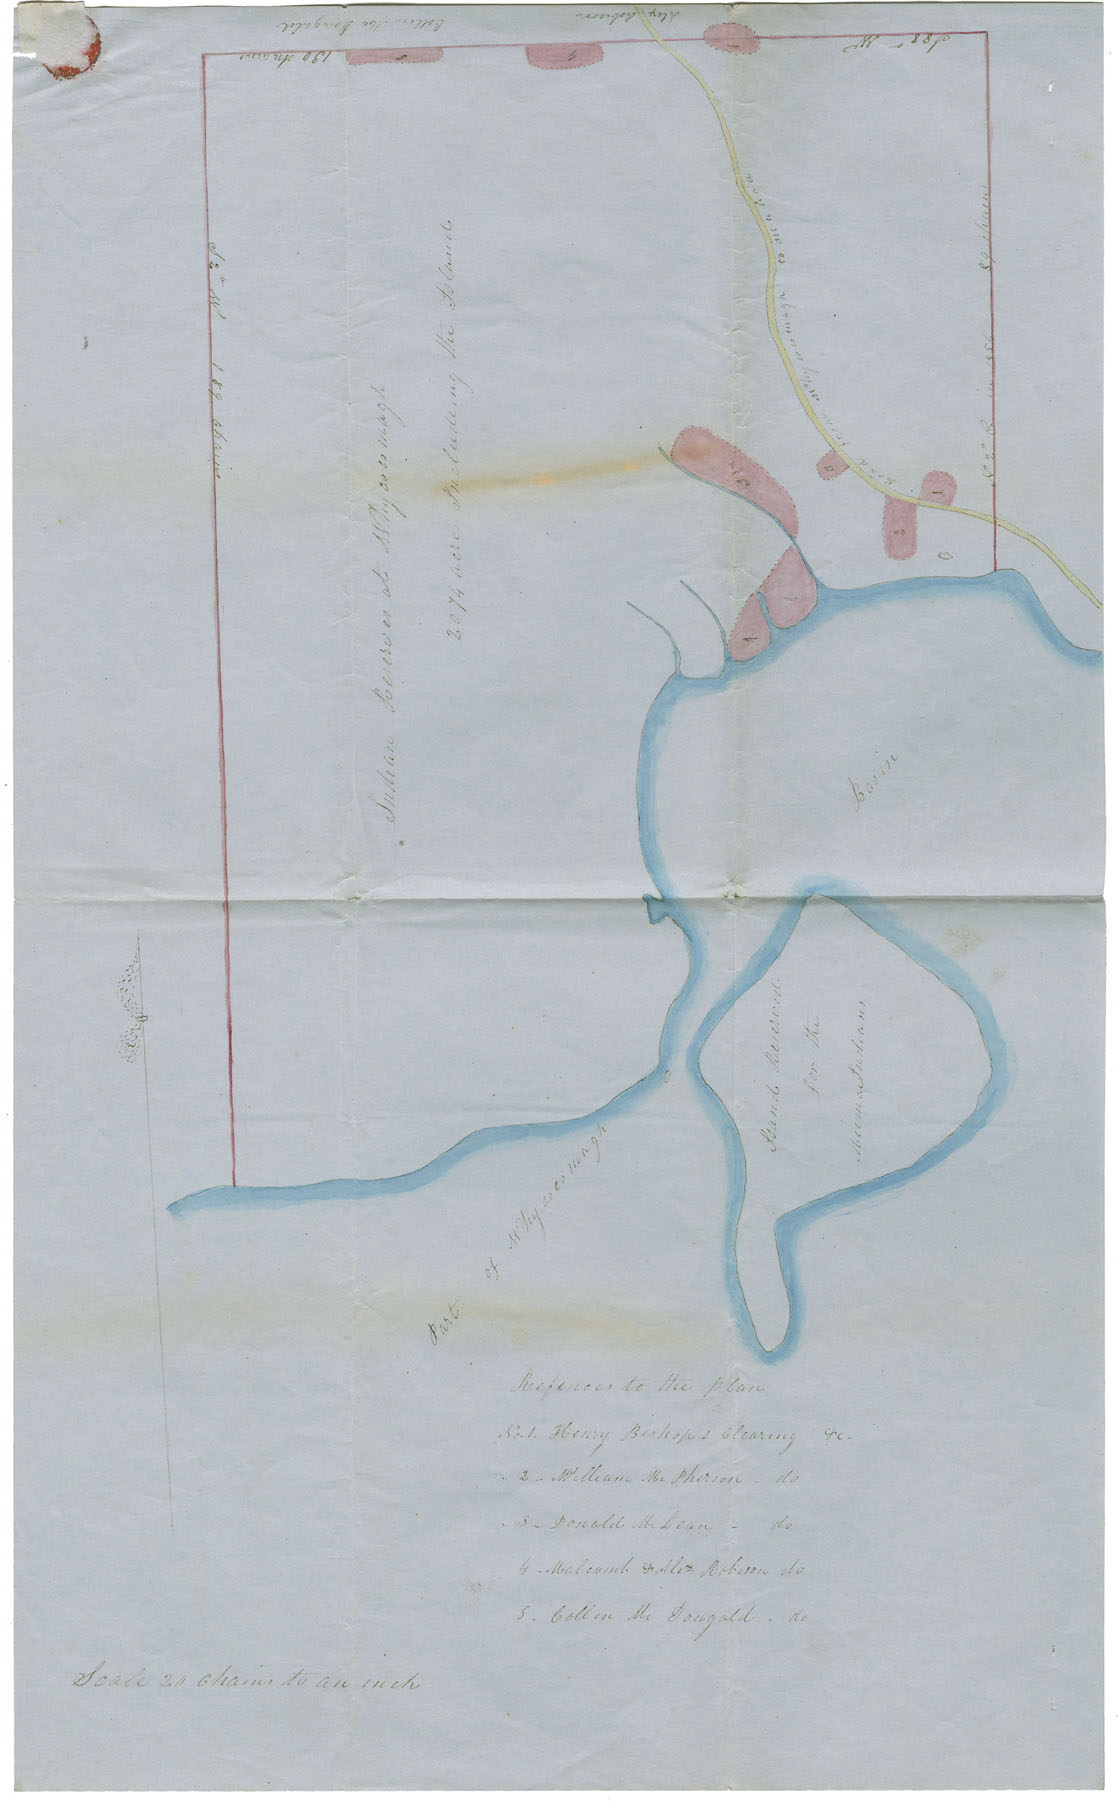 Petition of residents of Whycocomagh, Inverness County, requesting that the Mi'kmaq reserve be divided and half of it sold, with accompanying map. Mentions John Spry Morris.